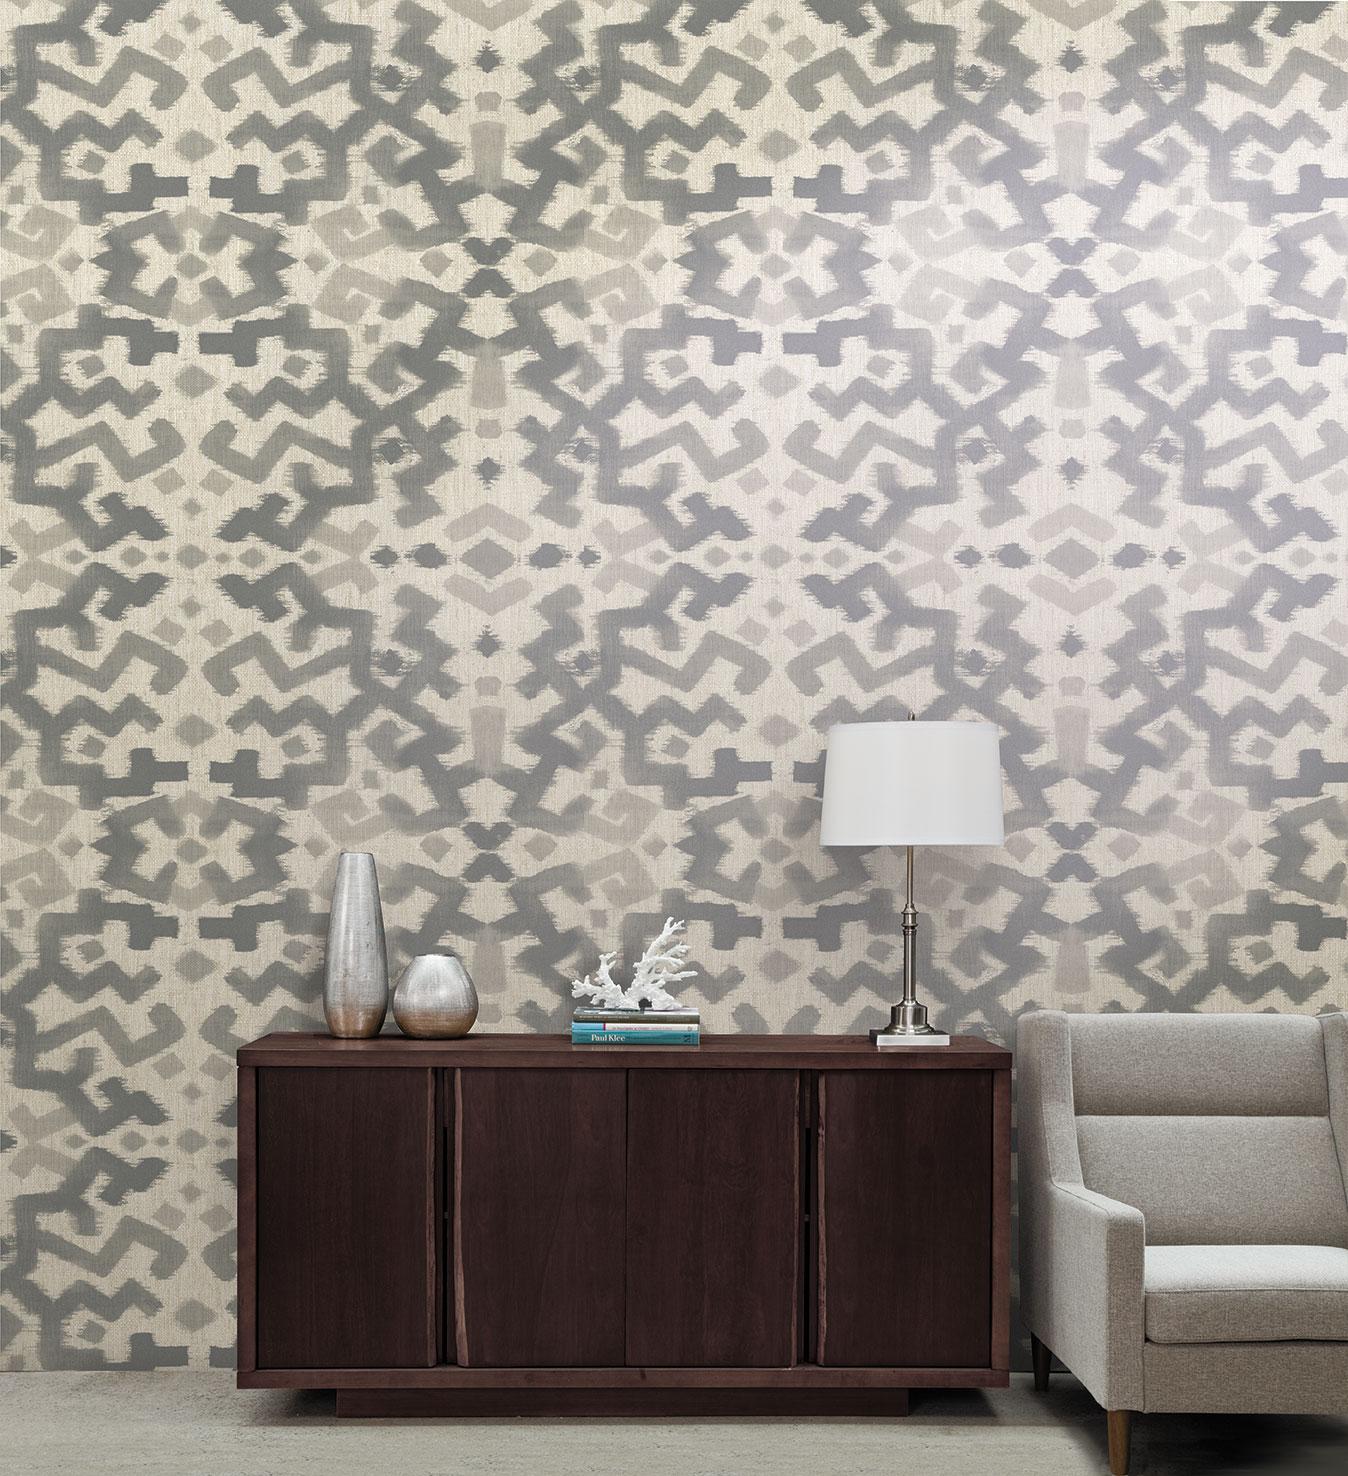 Impression De Terre Printed Wall-covering. This textured wall-covering is composed of linen mesh, on a non-woven paper back, digitally printed with tonal geometric pattern.

Maison Nurita carries an exclusive range of natural paper-backed